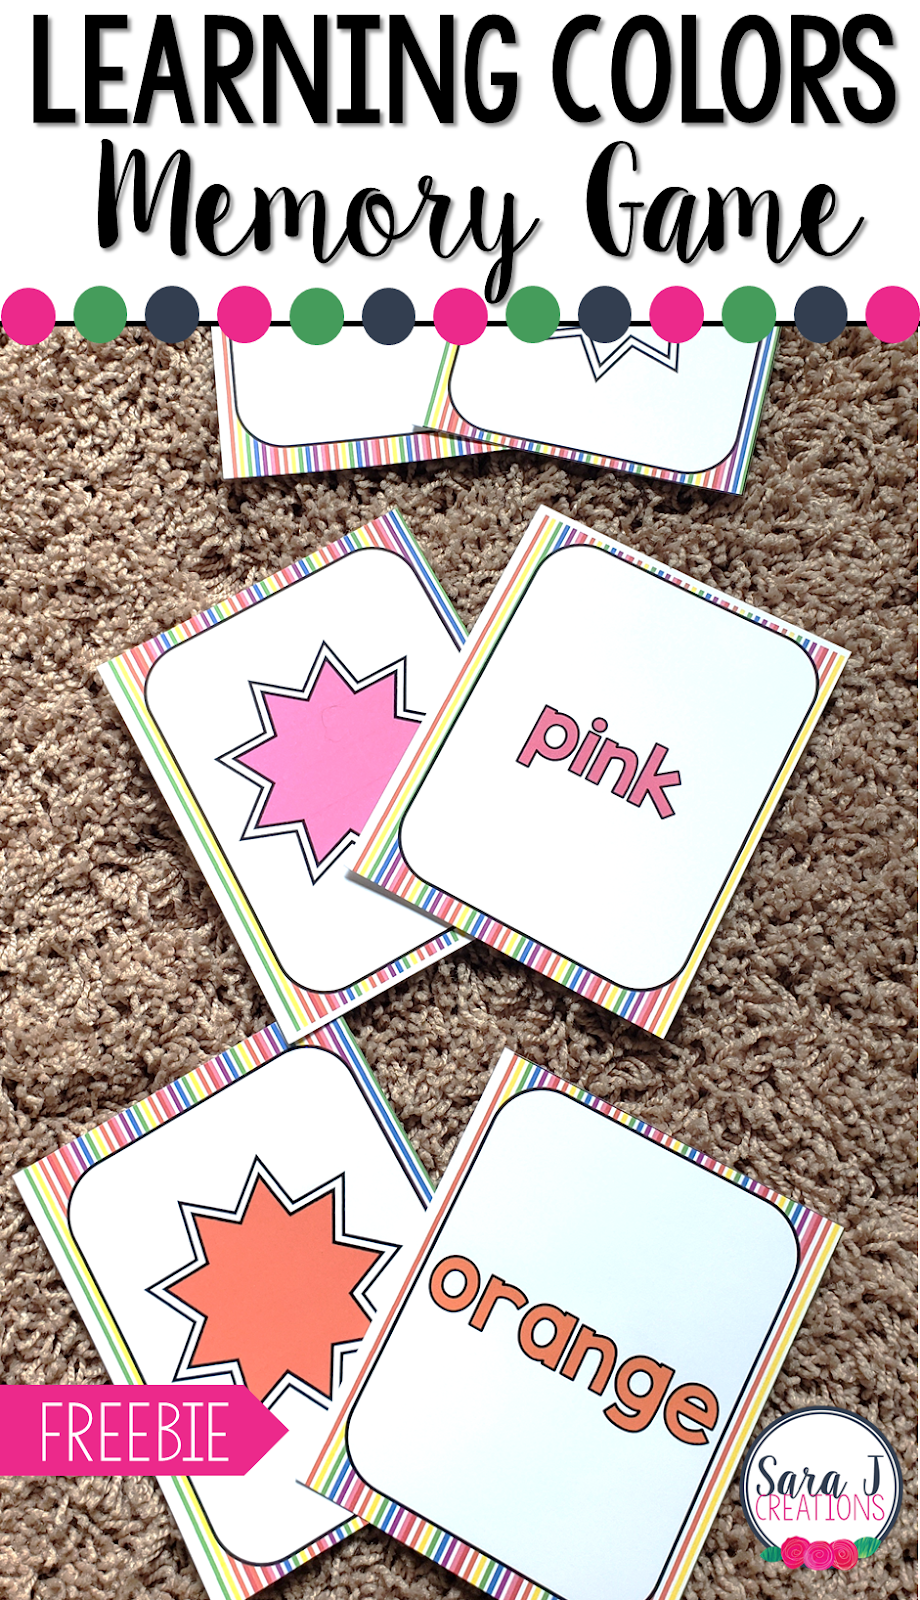 Learning Colors Memory Card Game